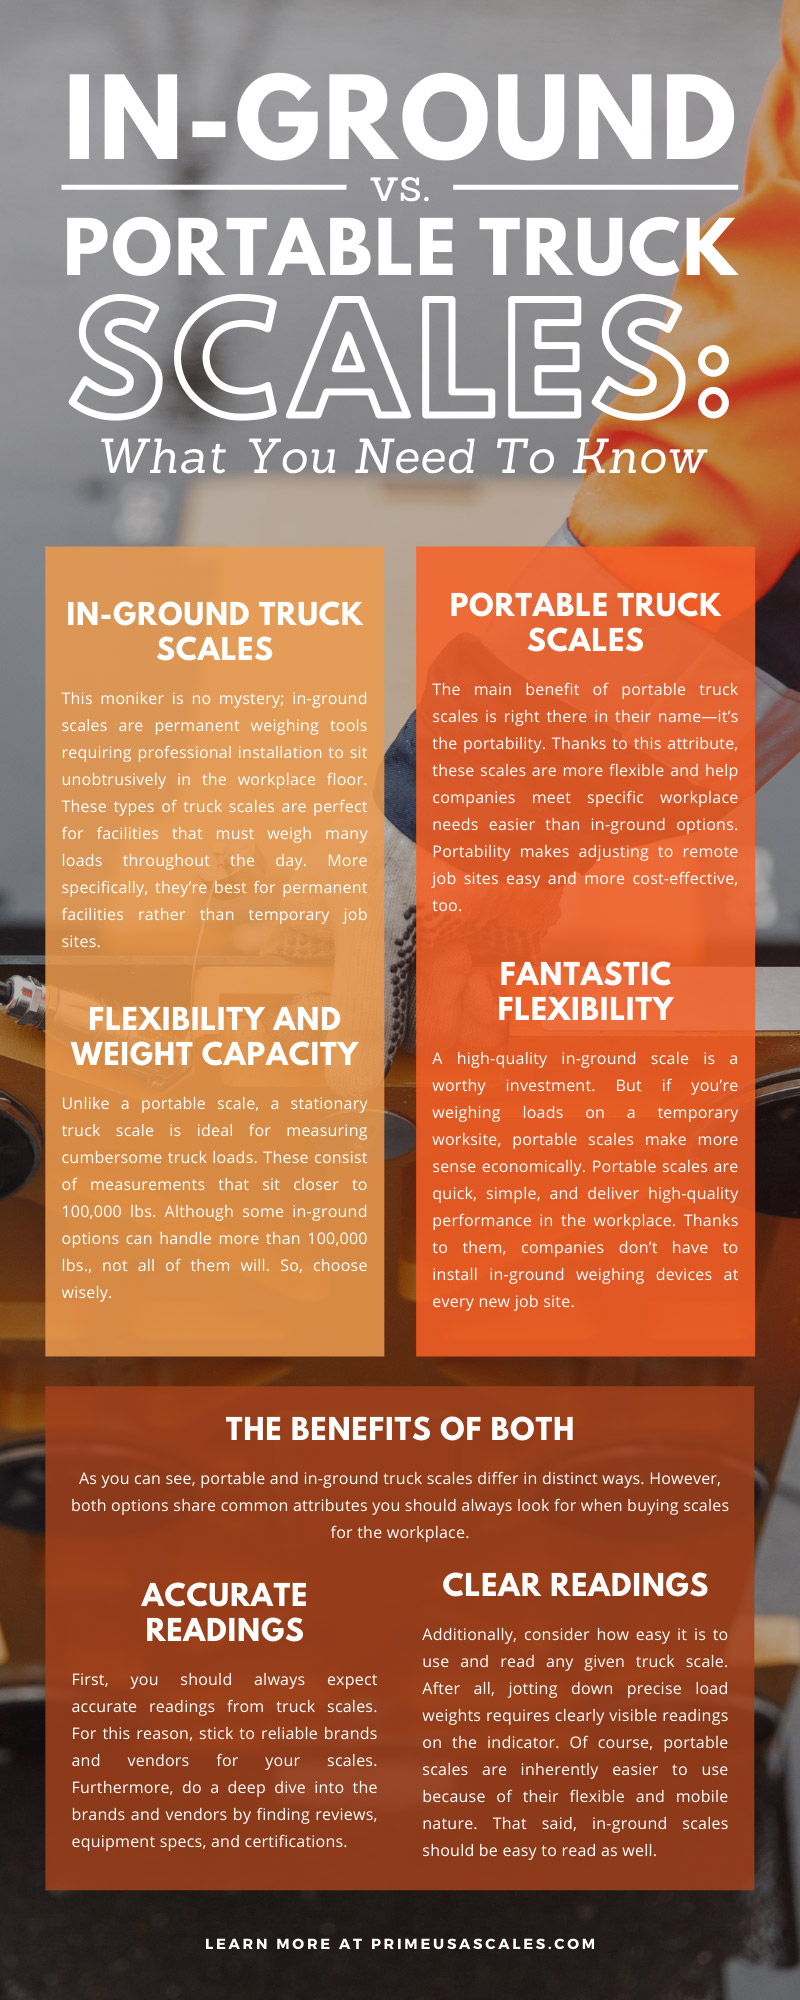 In-Ground vs. Portable Truck Scales: What You Need To Know